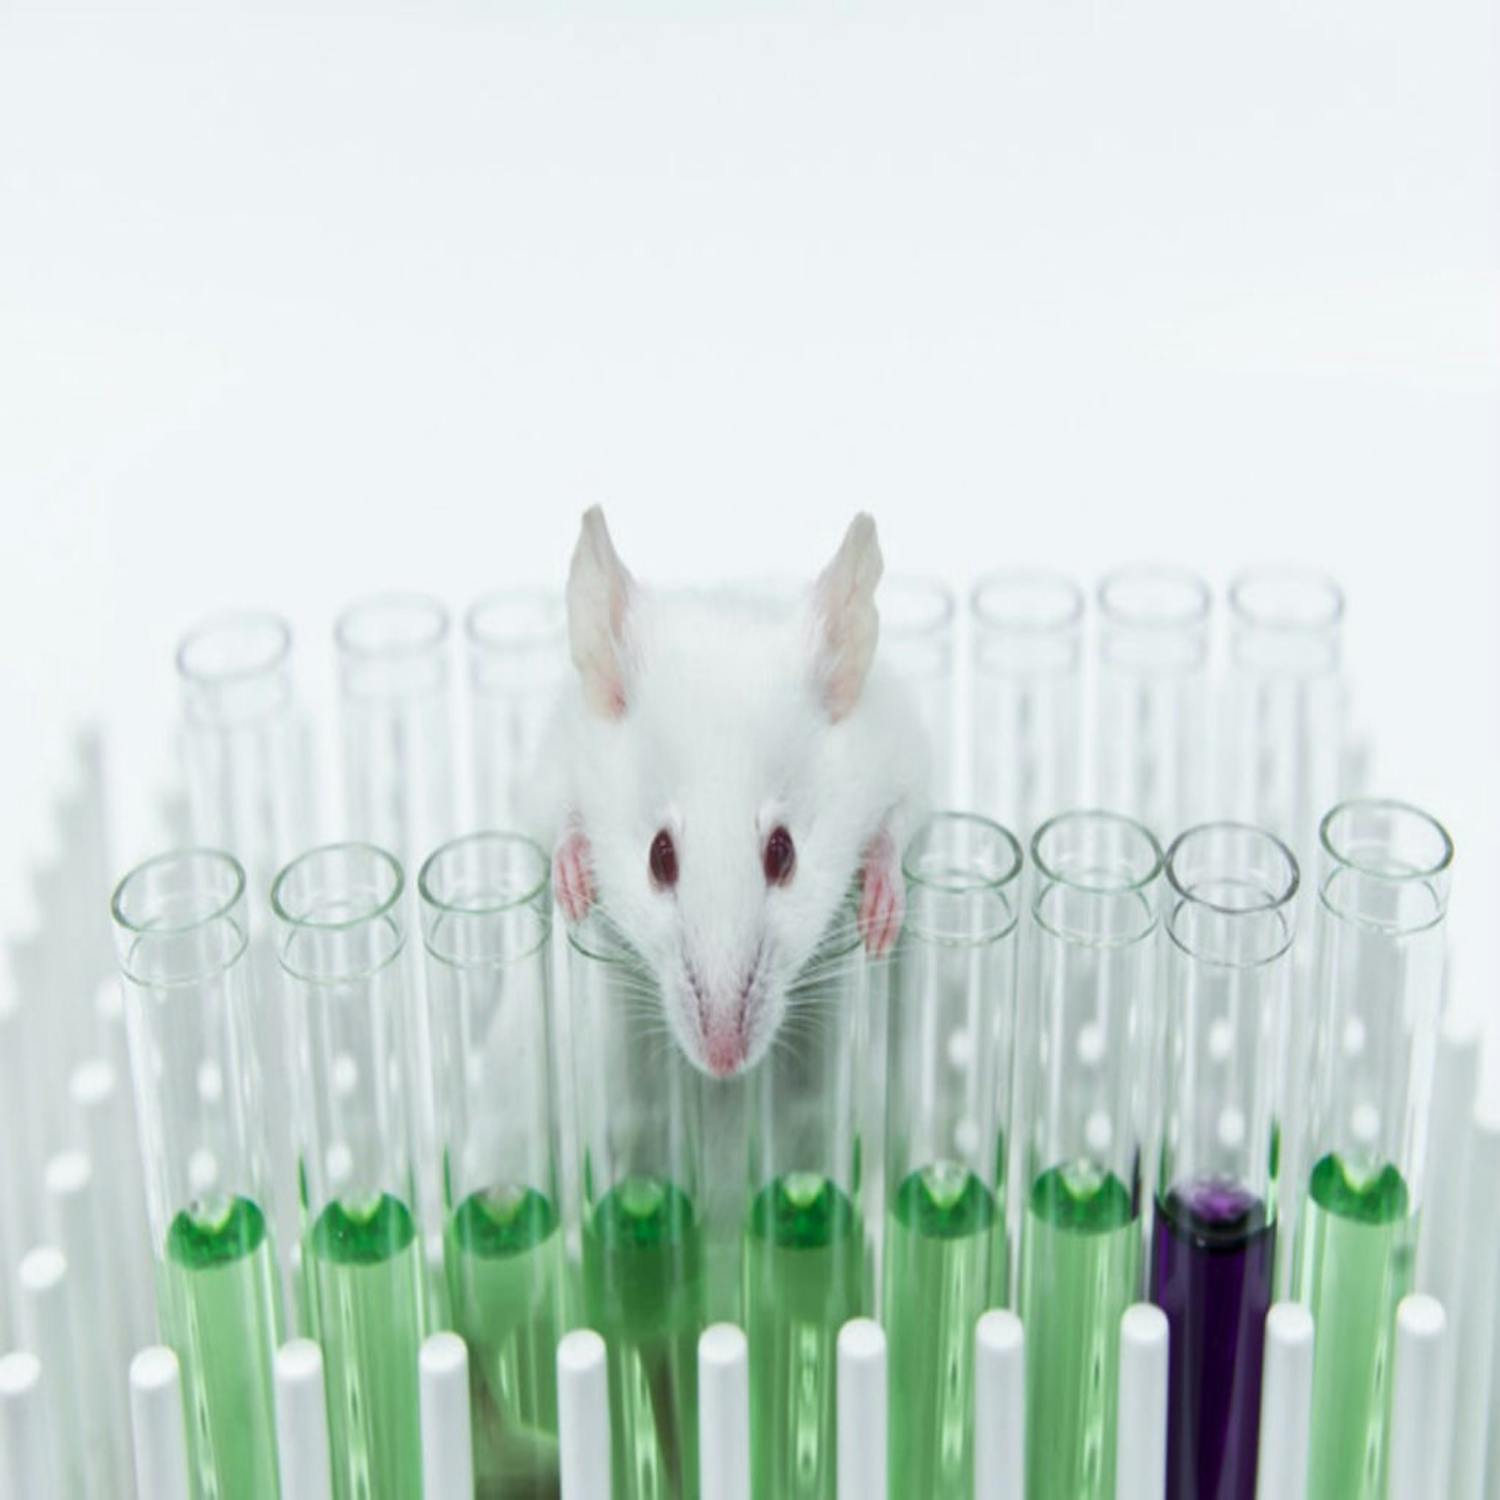 Human animal hybrid experiments in Japan